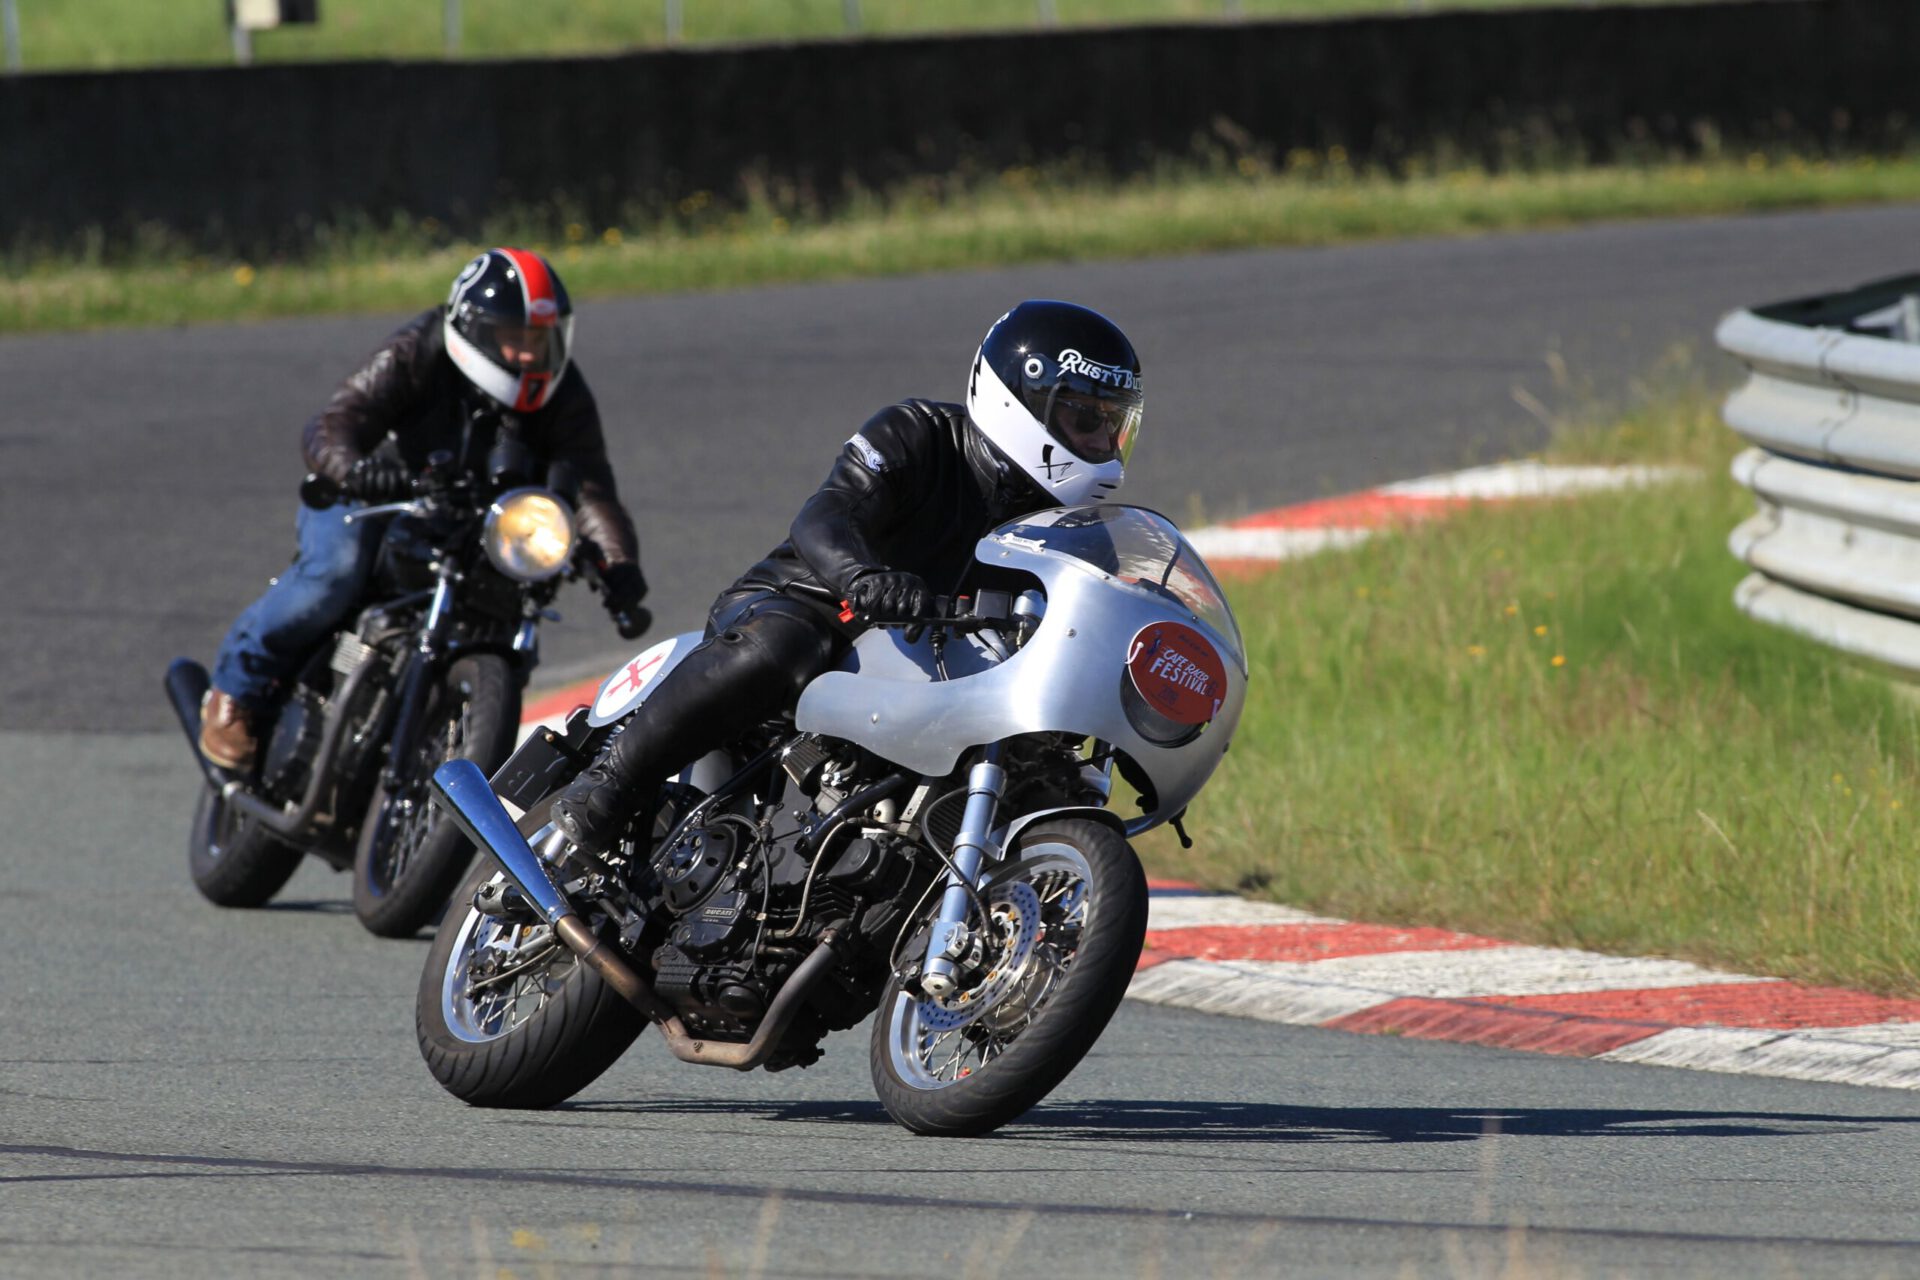 Cafe Racer Festival 2016 – 2019 on the Ducati Imola caferacer